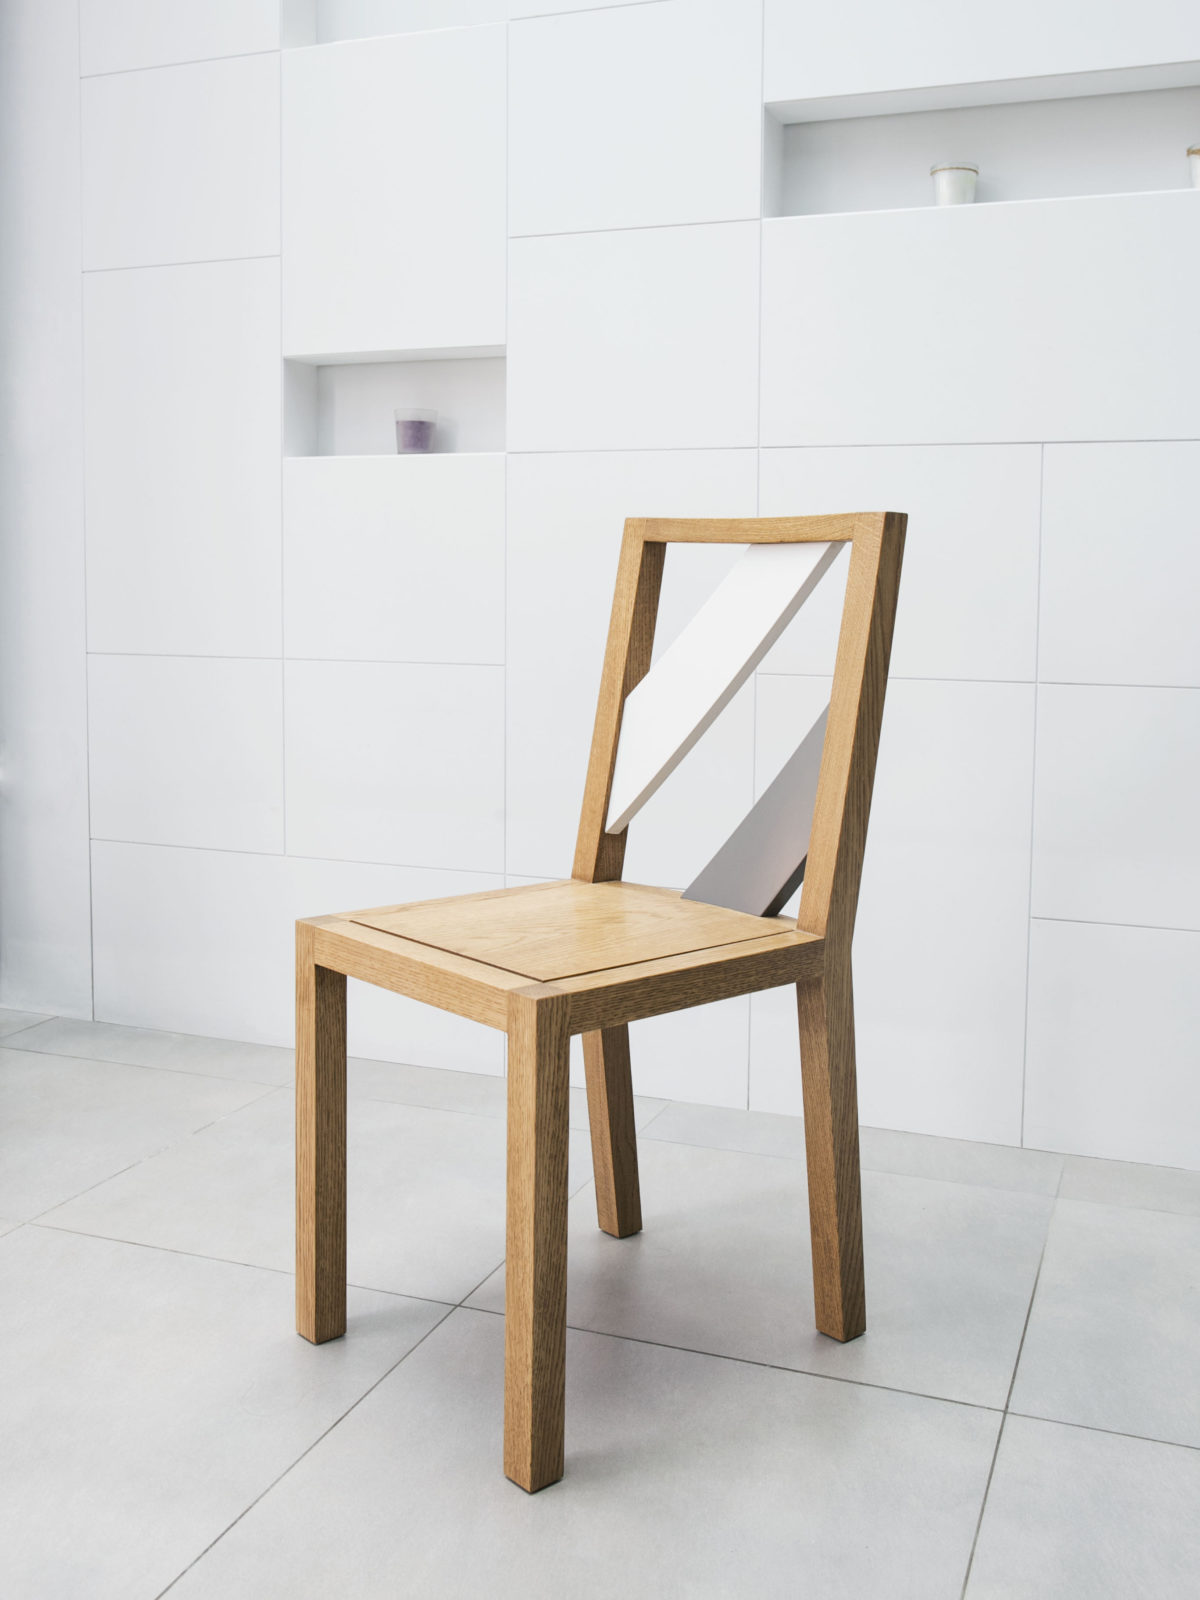 Solid oak chair with lacquered back strips